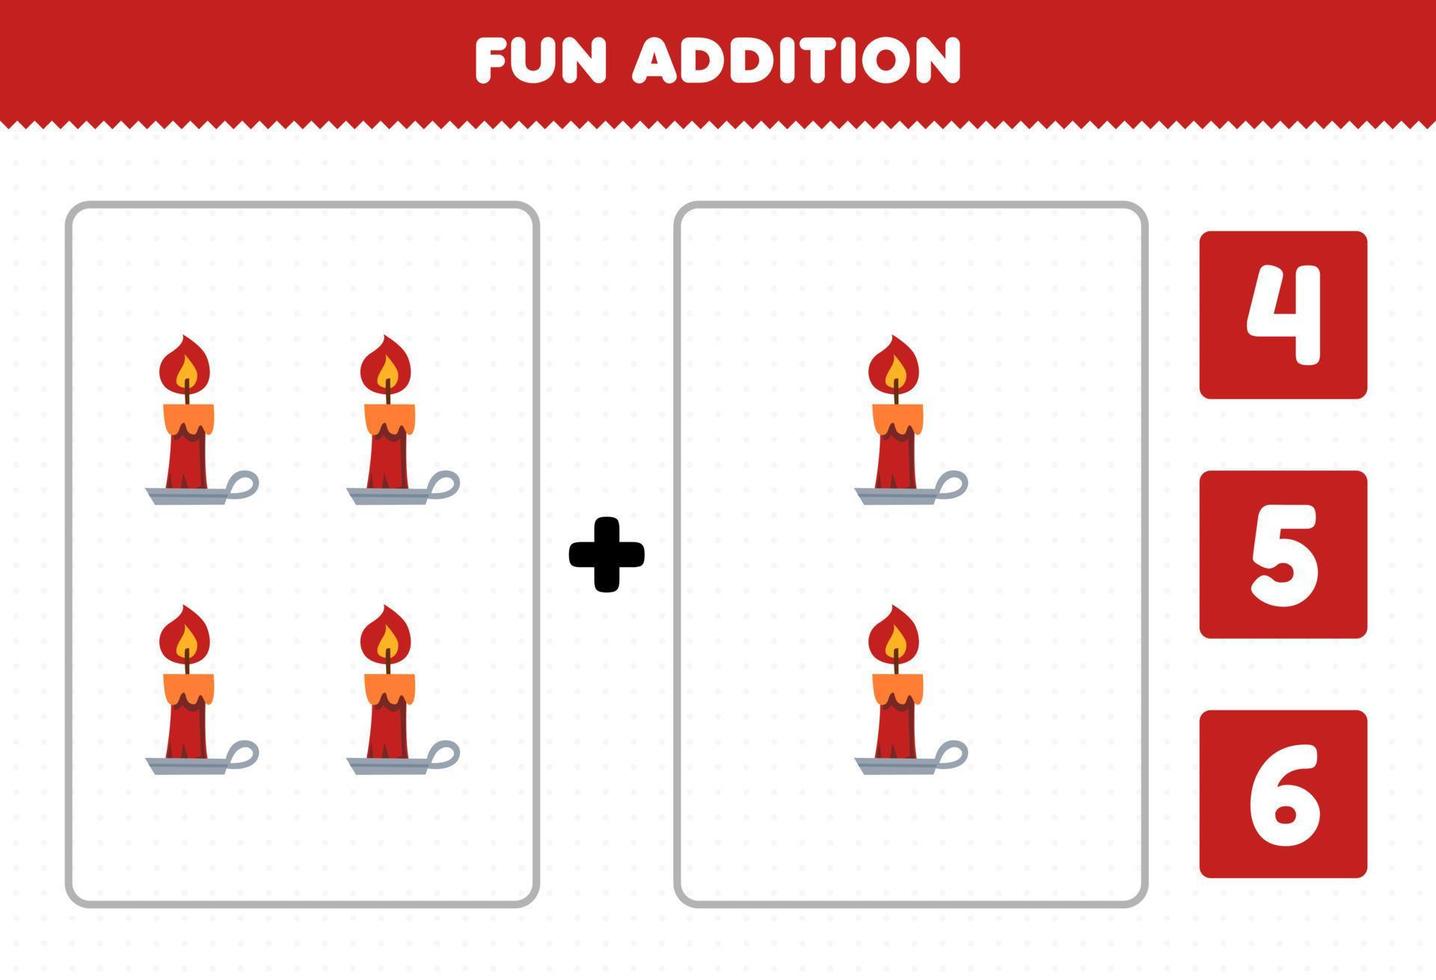 Education game for children fun addition by count and choose the correct answer of cute cartoon red candle halloween printable worksheet vector